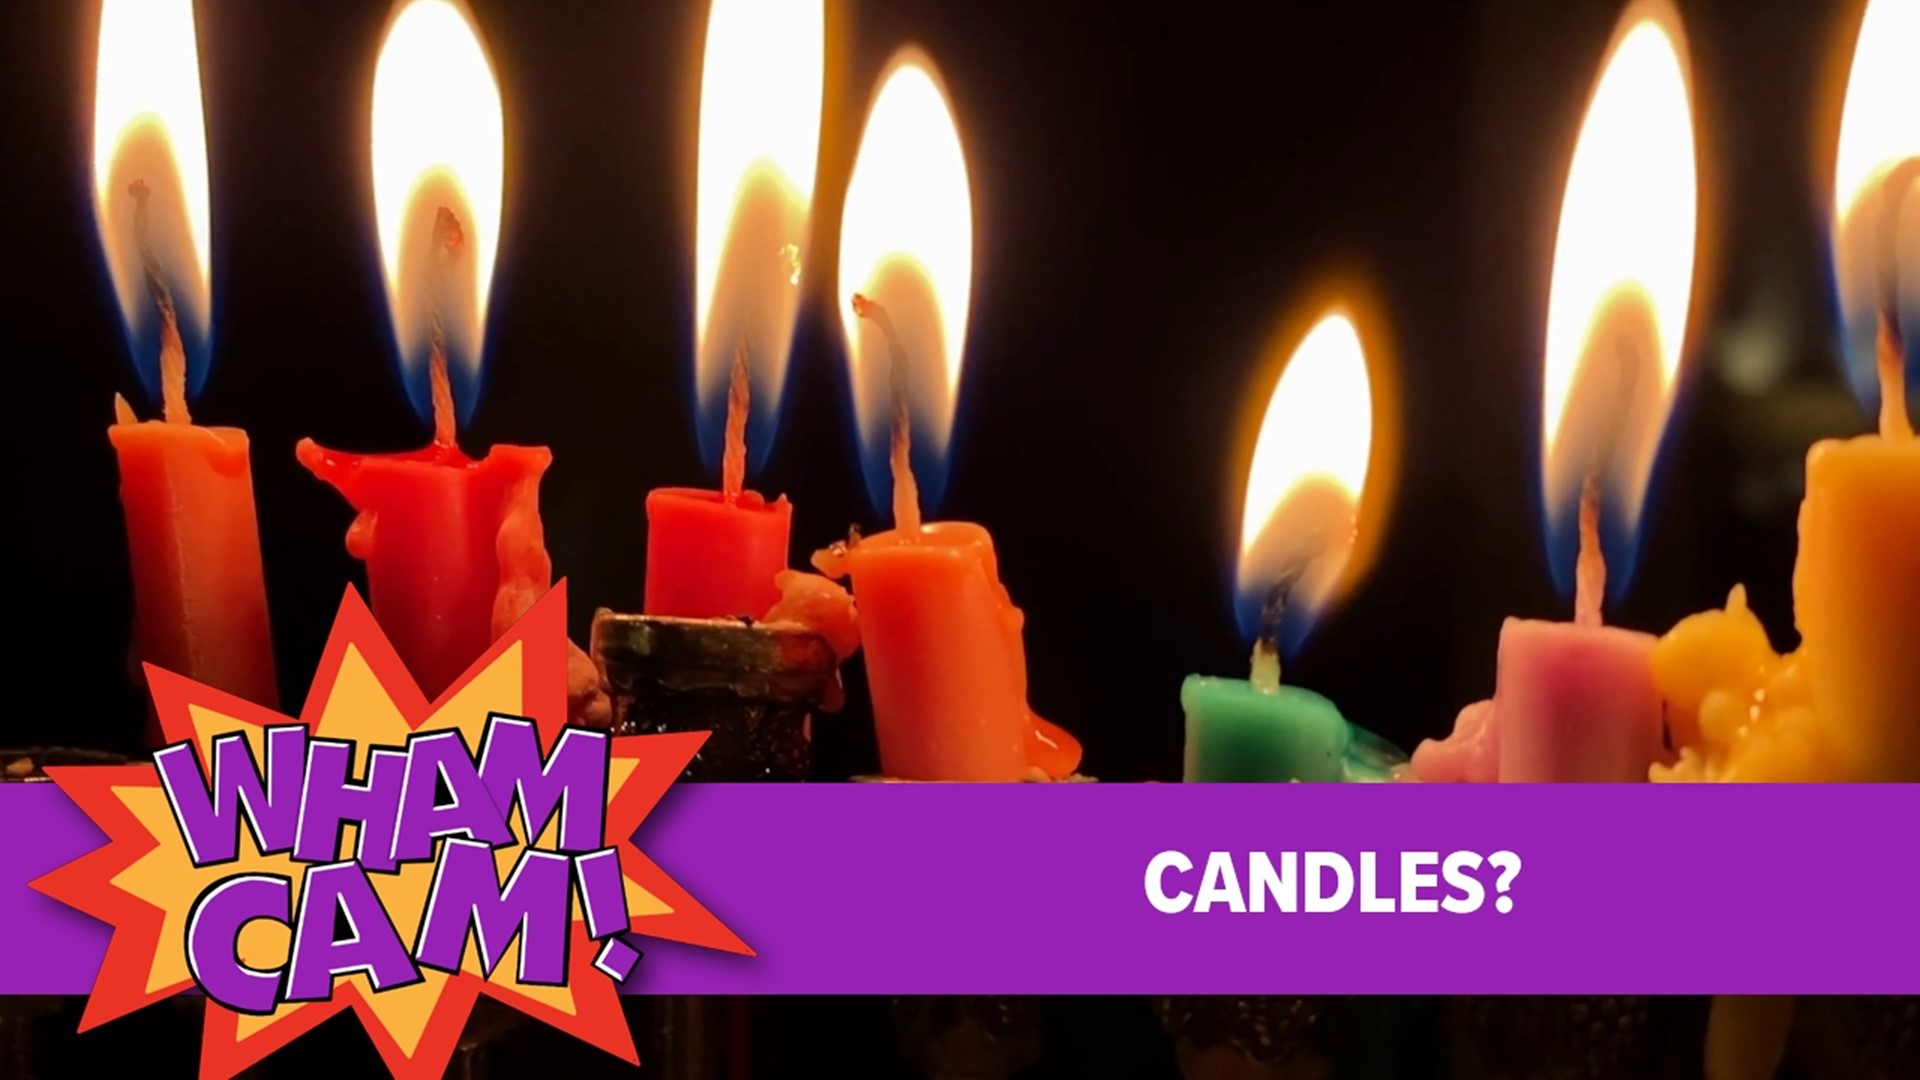 We're talking about candles in this Wham Cam. Ever wonder how they work? Joe headed to Dickson City to see if anyone there had the answer to this burning question.